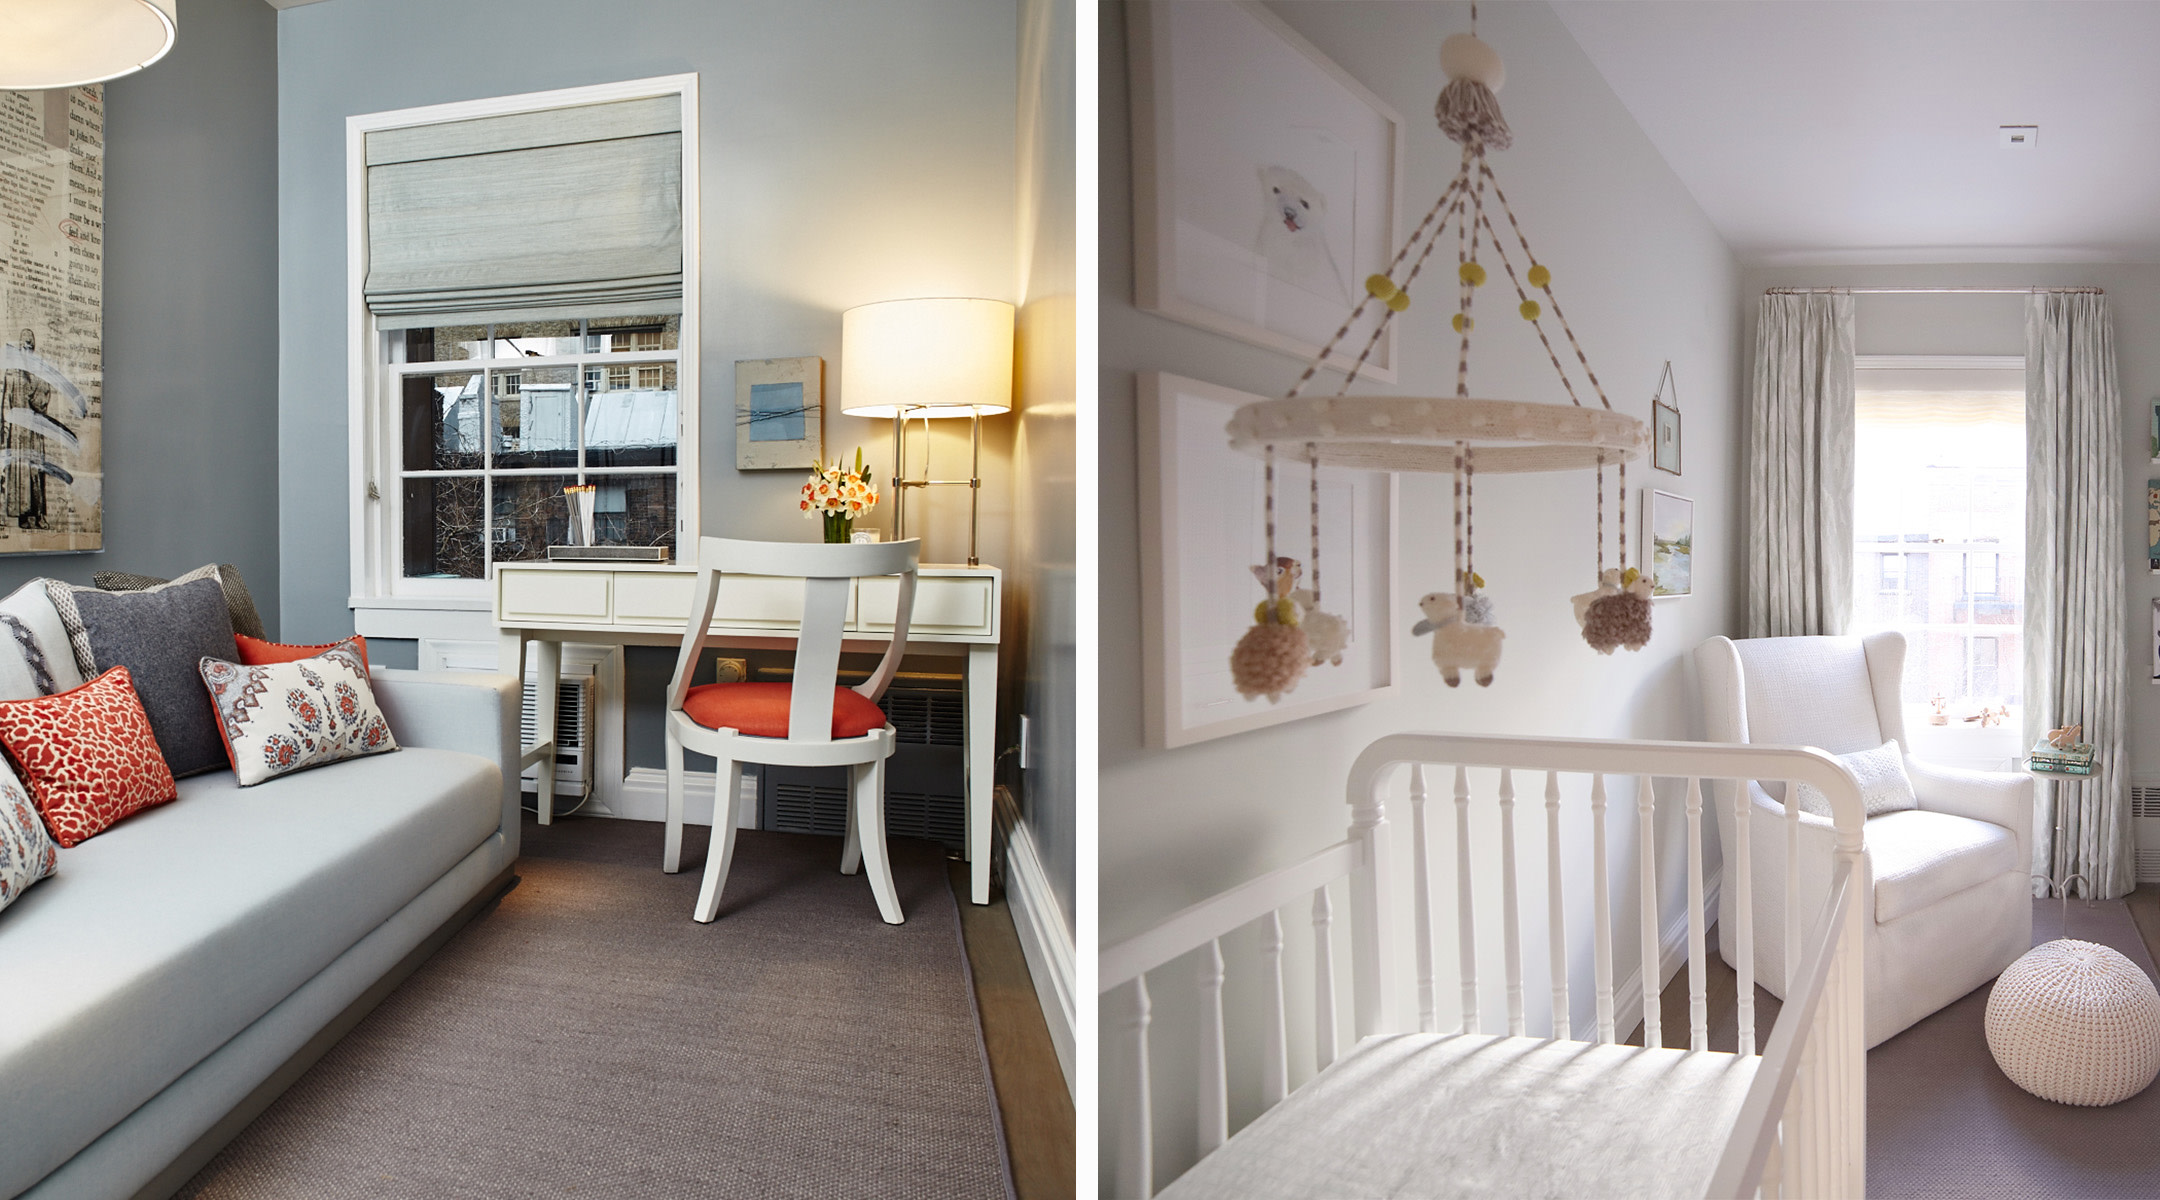 Before and after nursery